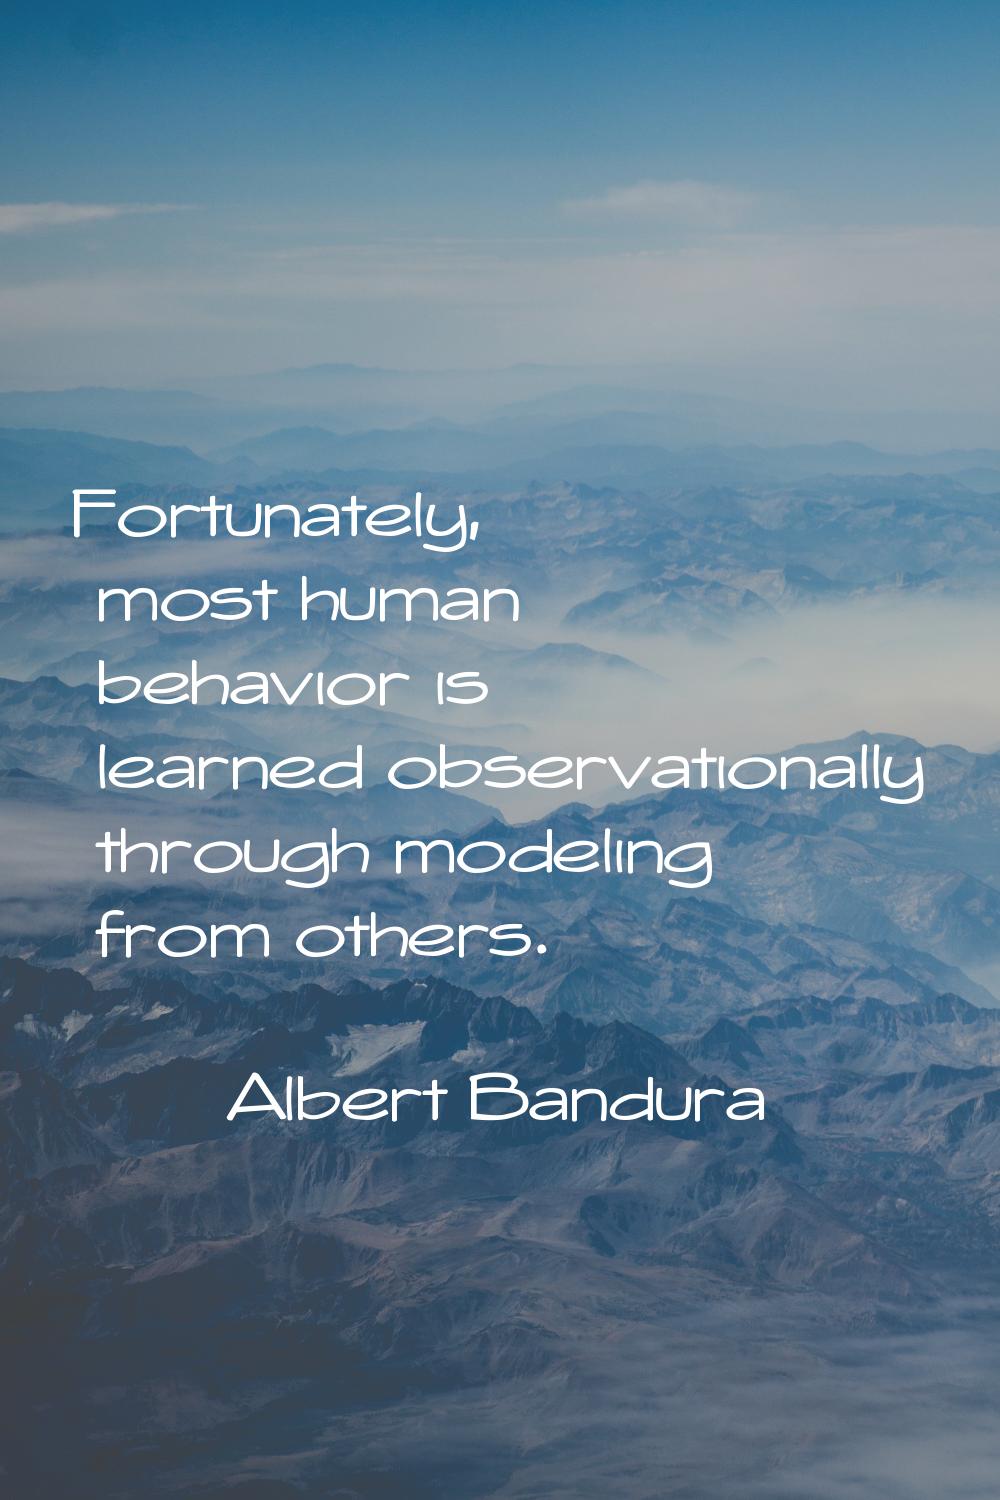 Fortunately, most human behavior is learned observationally through modeling from others.